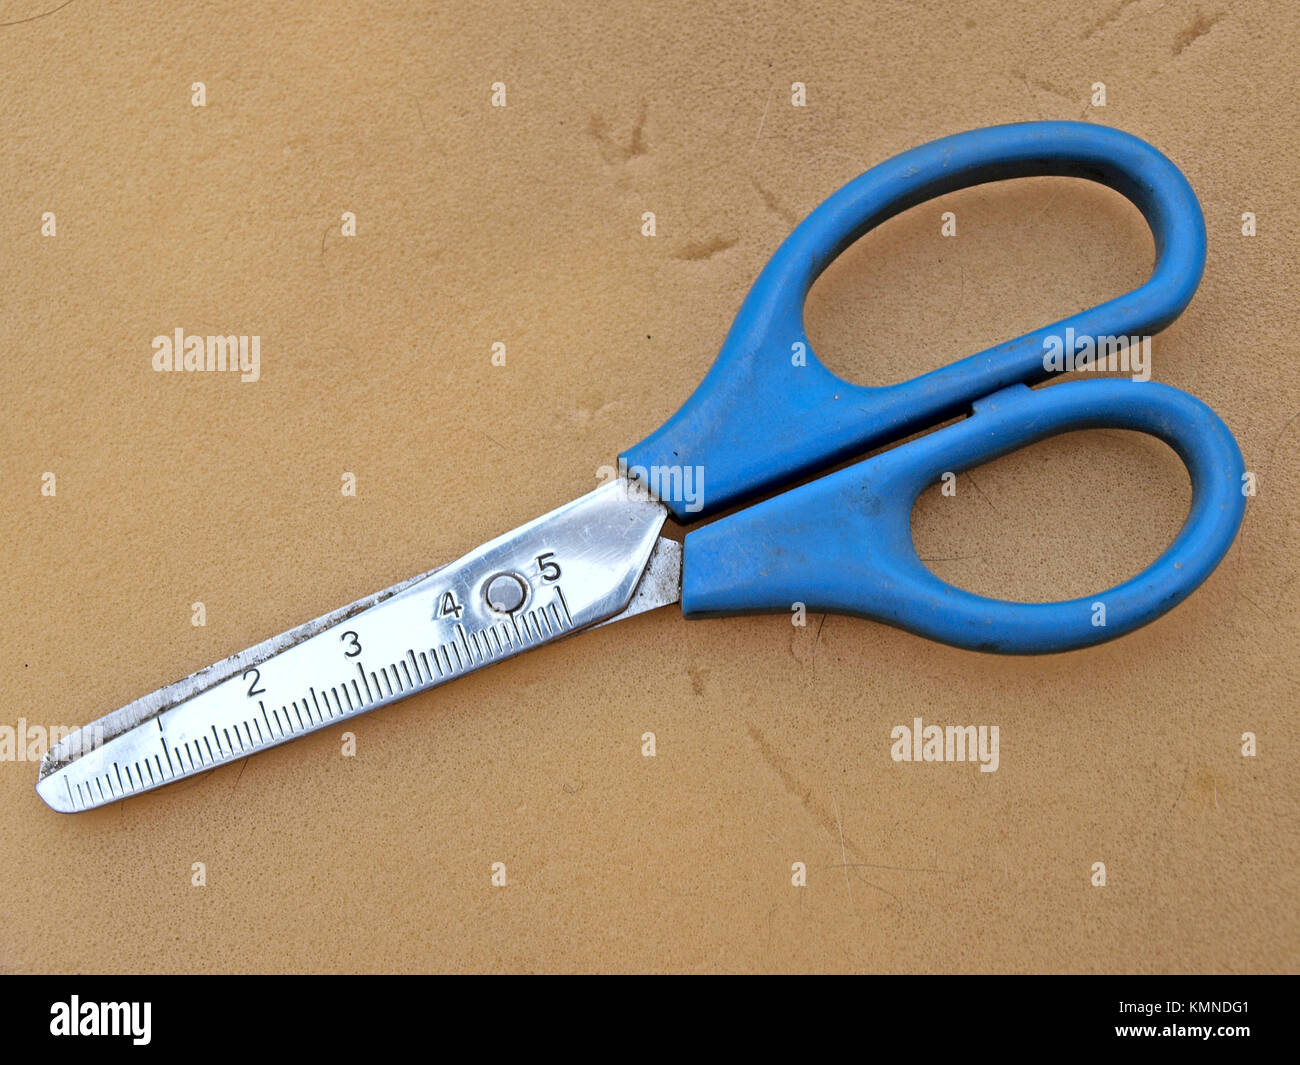 Scissors with centimeters ruler close up on foam rubber sheet Stock Photo